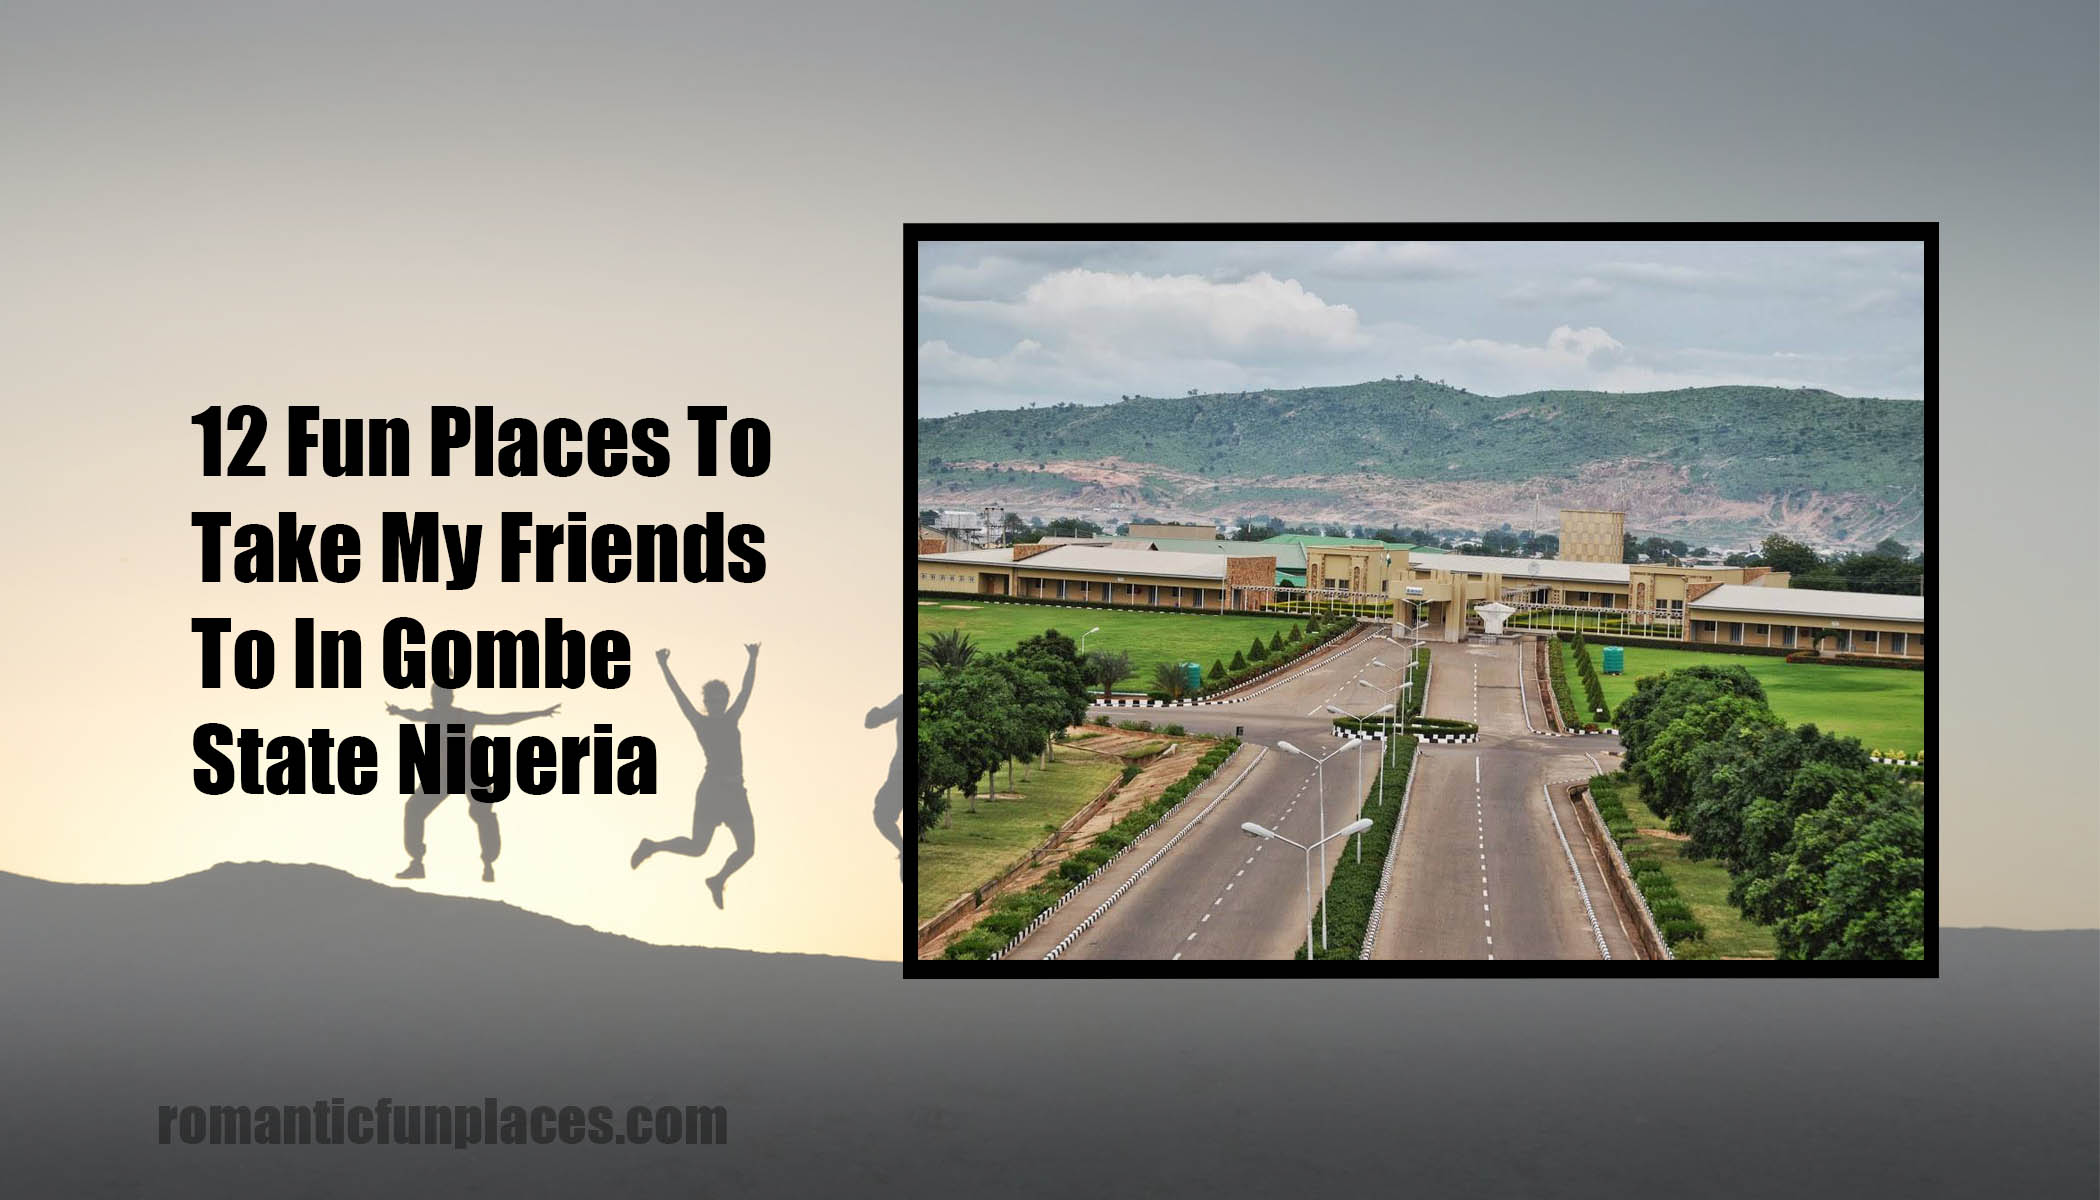 12 Fun Places To Take My Friends To In Gombe State Nigeria